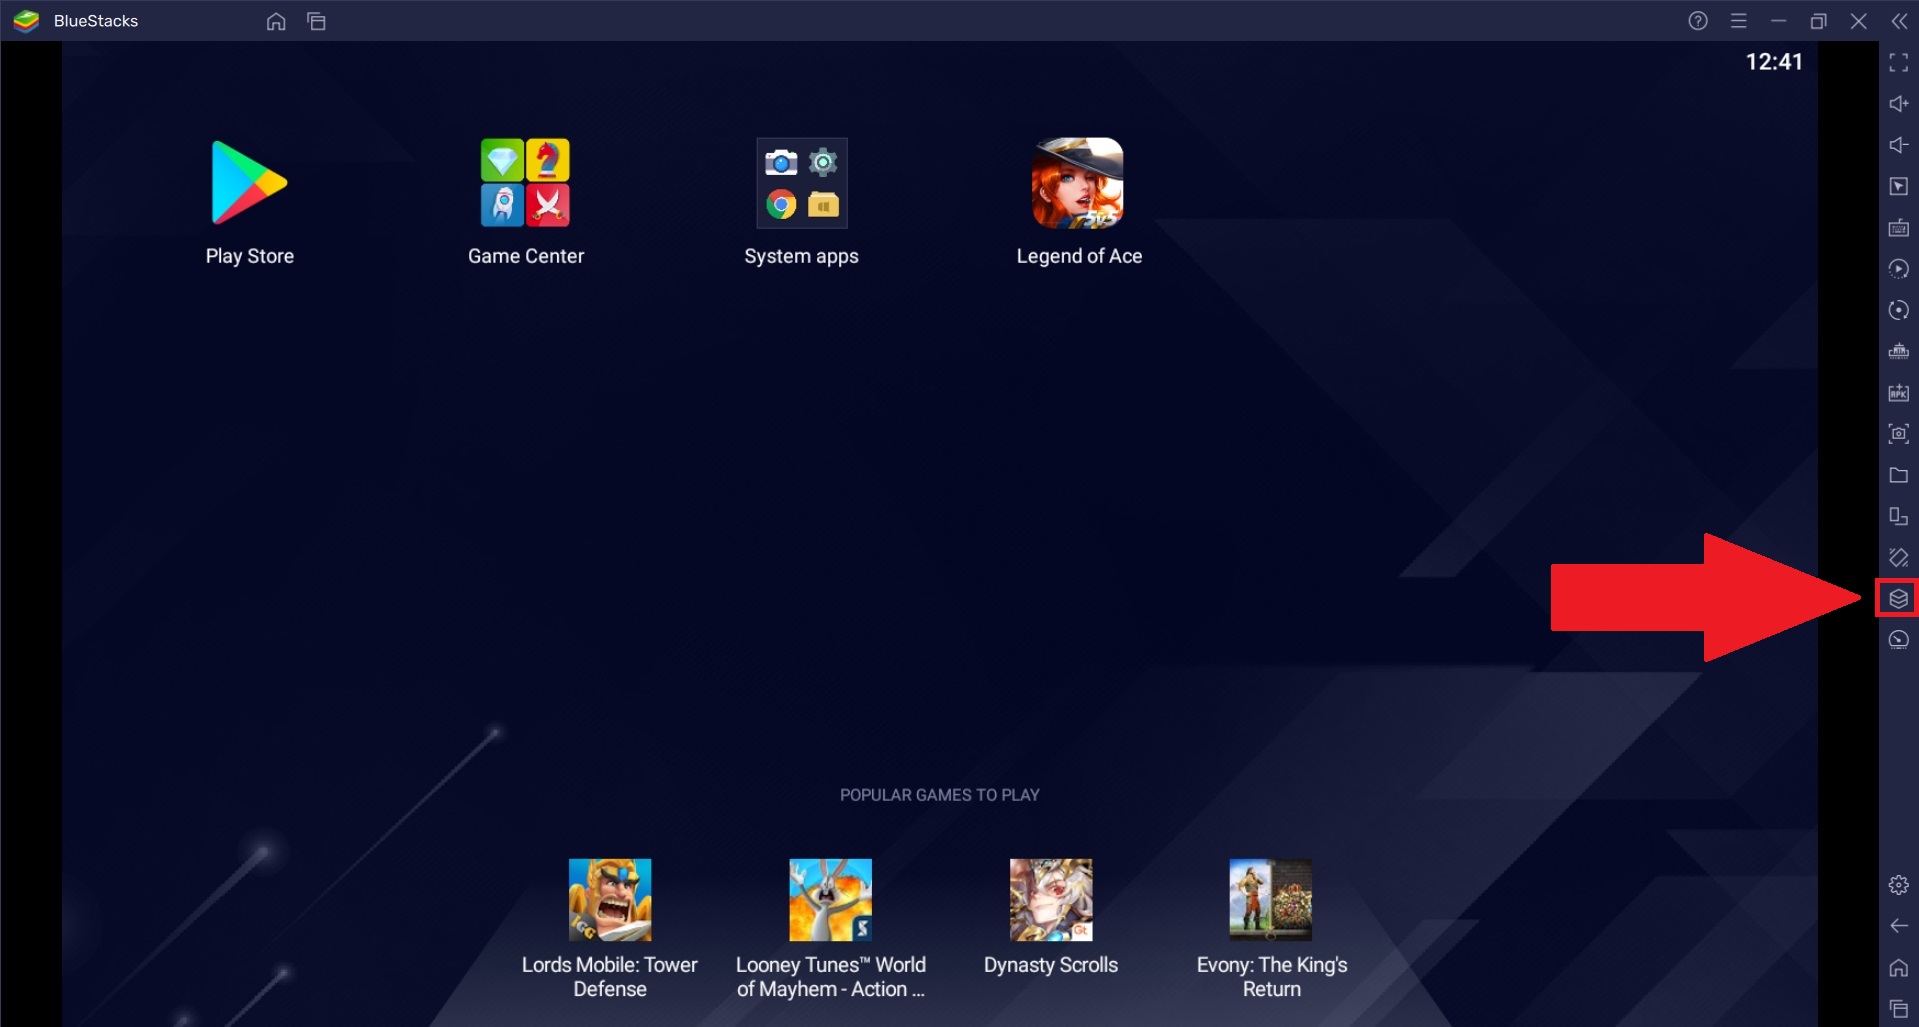 bluestacks multi instance manager does not launch